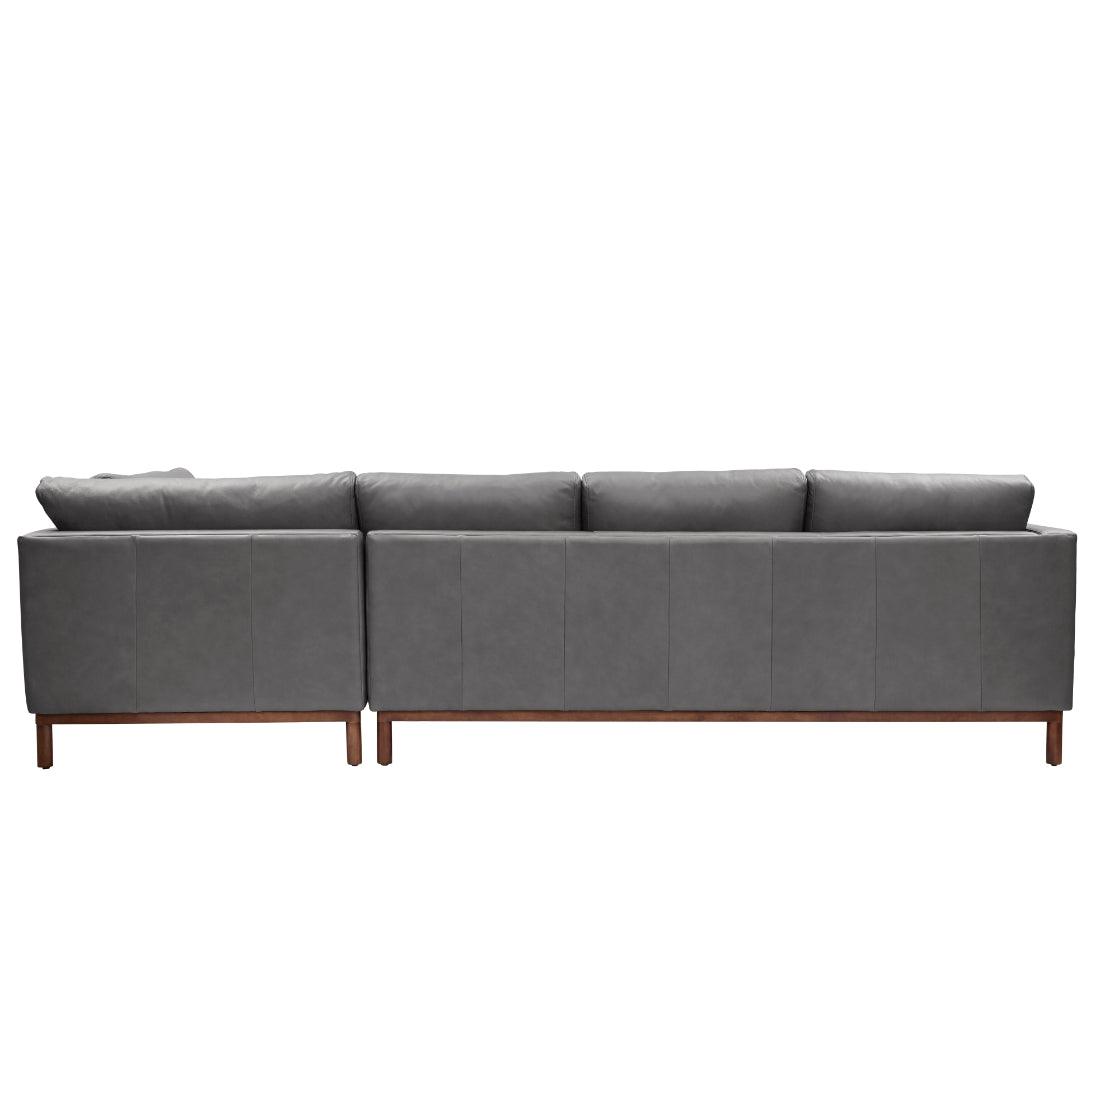 Freehand Leather Sectional With Chaise Made to Order - Uptown Sebastian